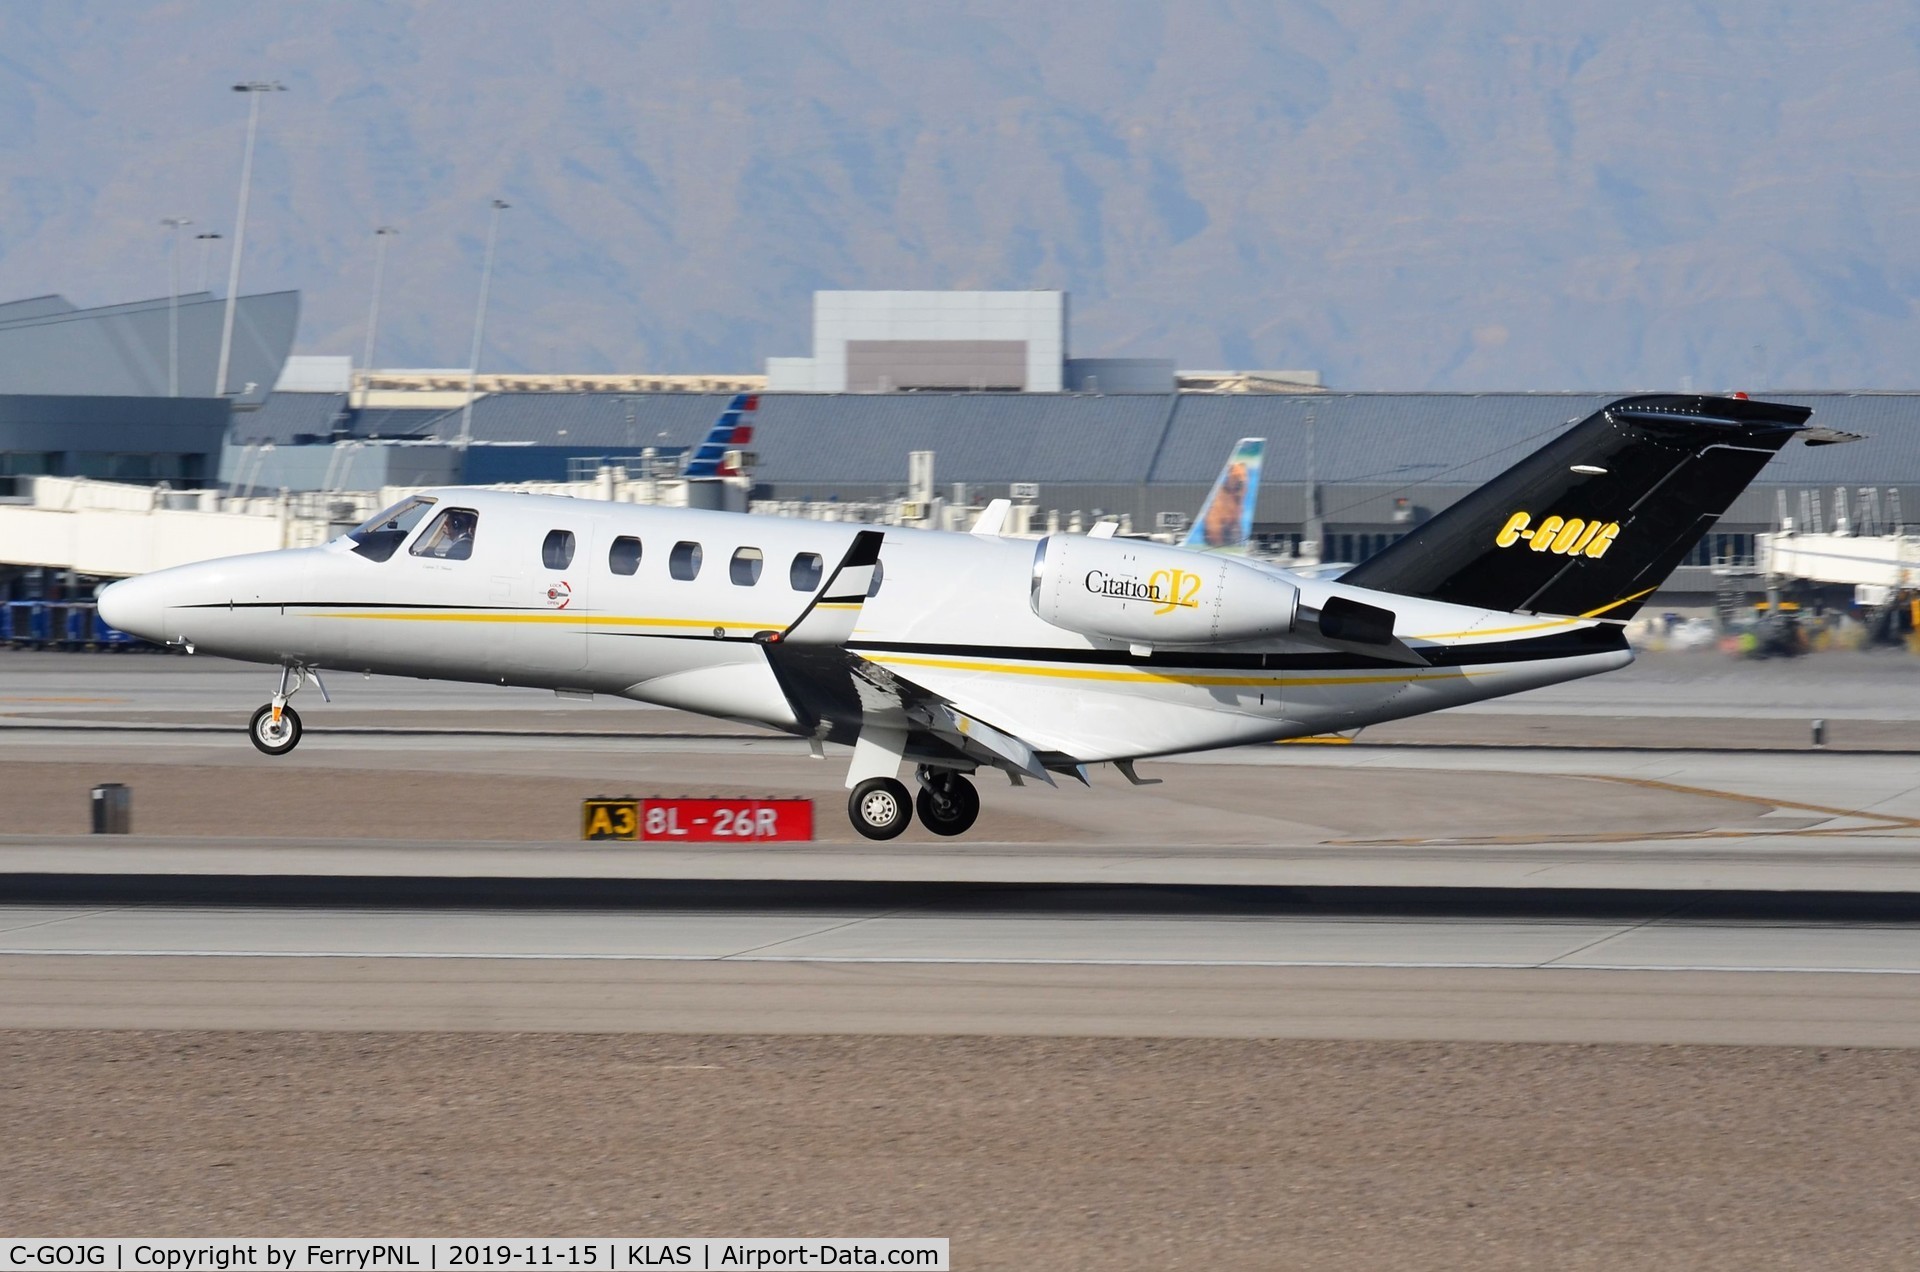 C-GOJG, 2002 Cessna 525A CitationJet CJ2 C/N 525A-0087, Canadian CJ2 about to touch down in LAS